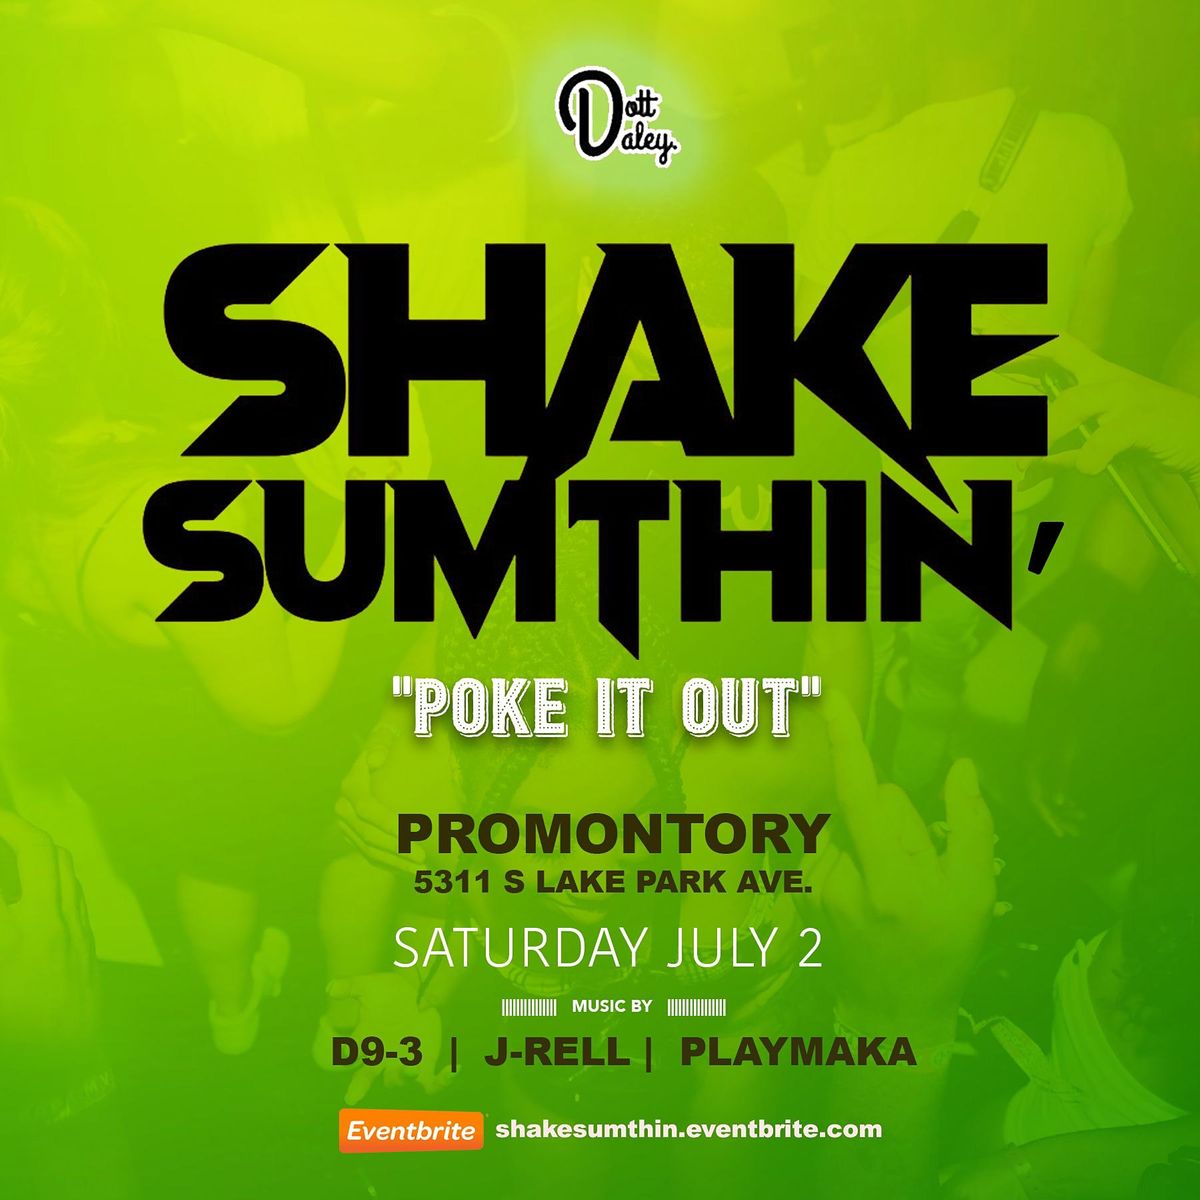 SHAKE SUMTHIN': Poke It Out!